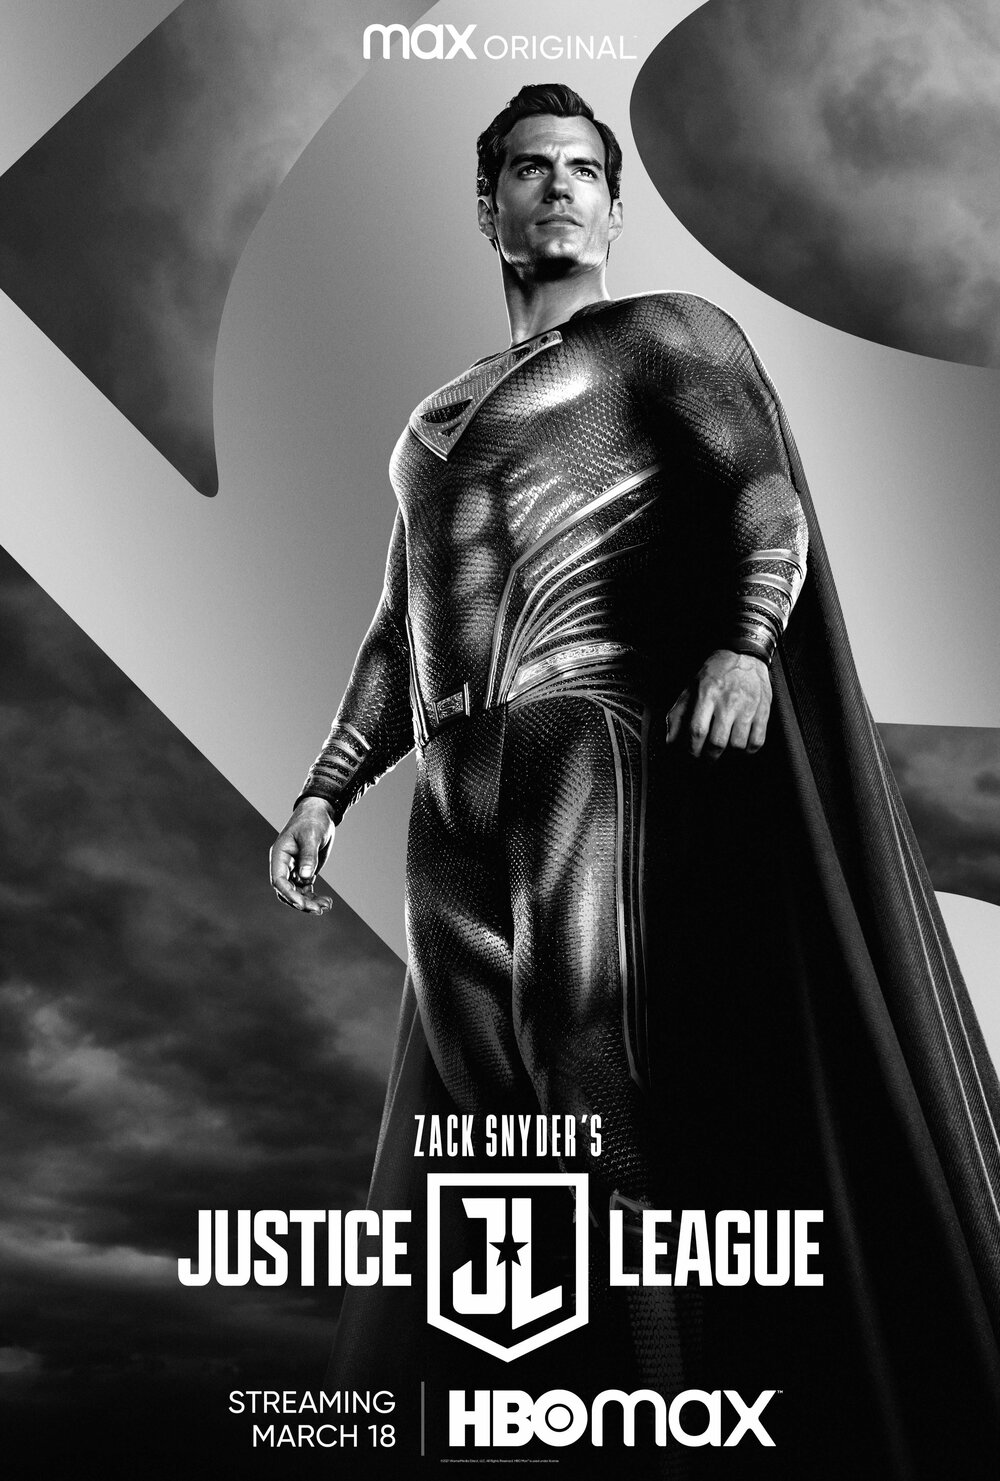 Zack Snyder's JUSTICE LEAGUE Gets a New Trailer and Poster Focusing on Superman